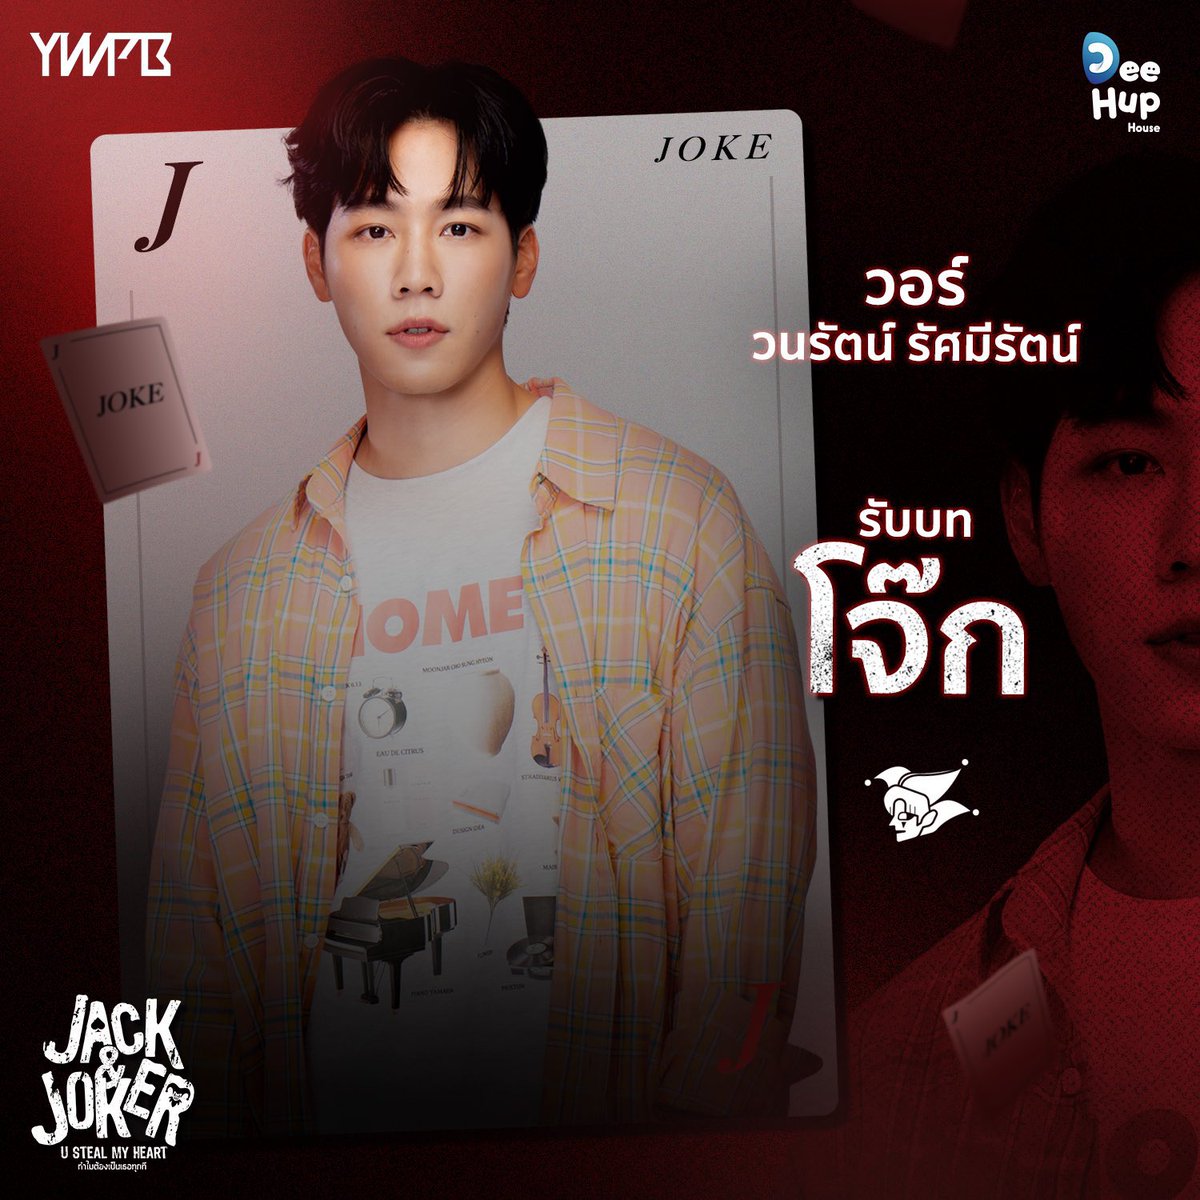 MEET: #YinWar as Jack and Joke in the upcoming Thai BL “#JACKANDJOKER”, a collaboration project between YWPB Entertainment and Dee Hup House, renowned for “I Feel You Linger in the Air.”

Yin Anan portrays the role of Jack, a former black belt in Taekwondo who is now a handsome